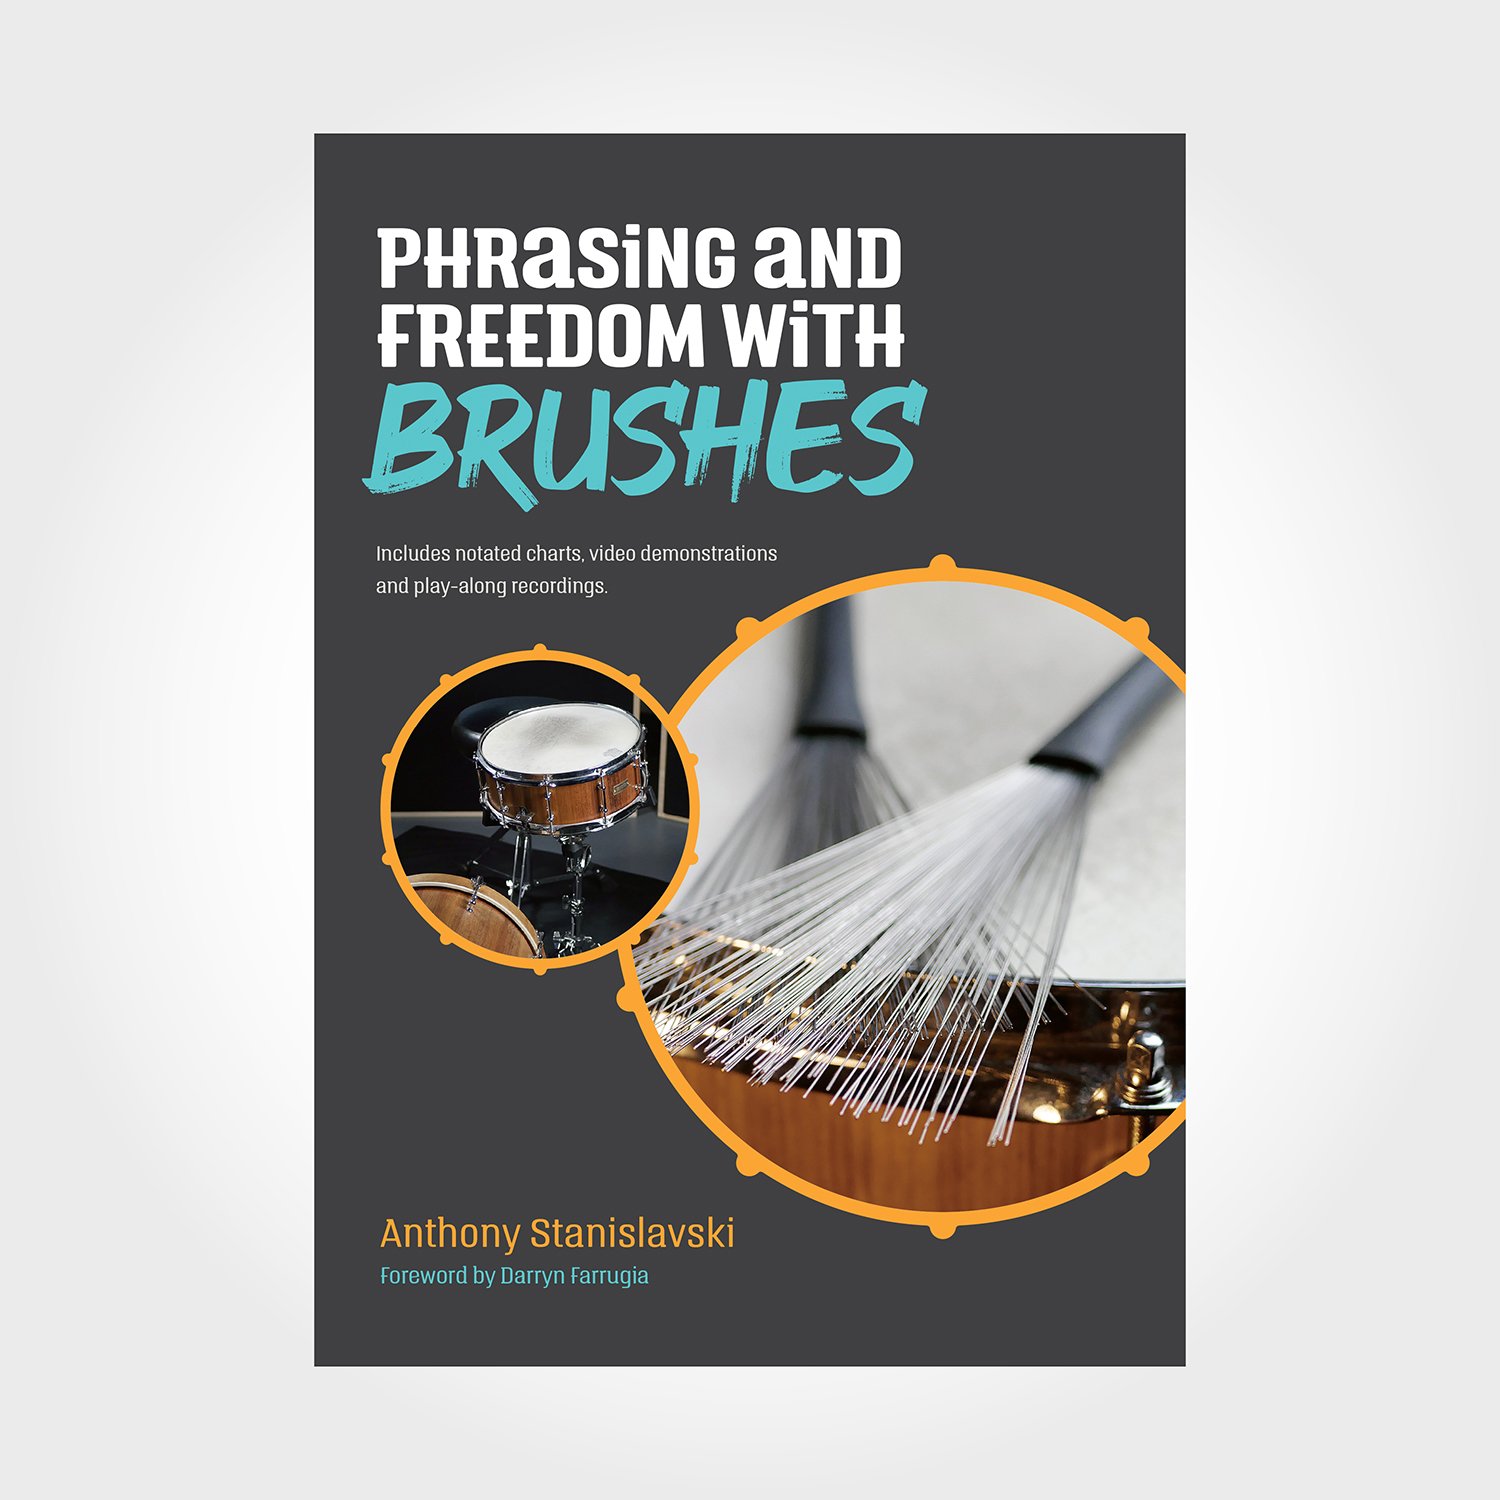 Phrasing and Freedom with Brushes